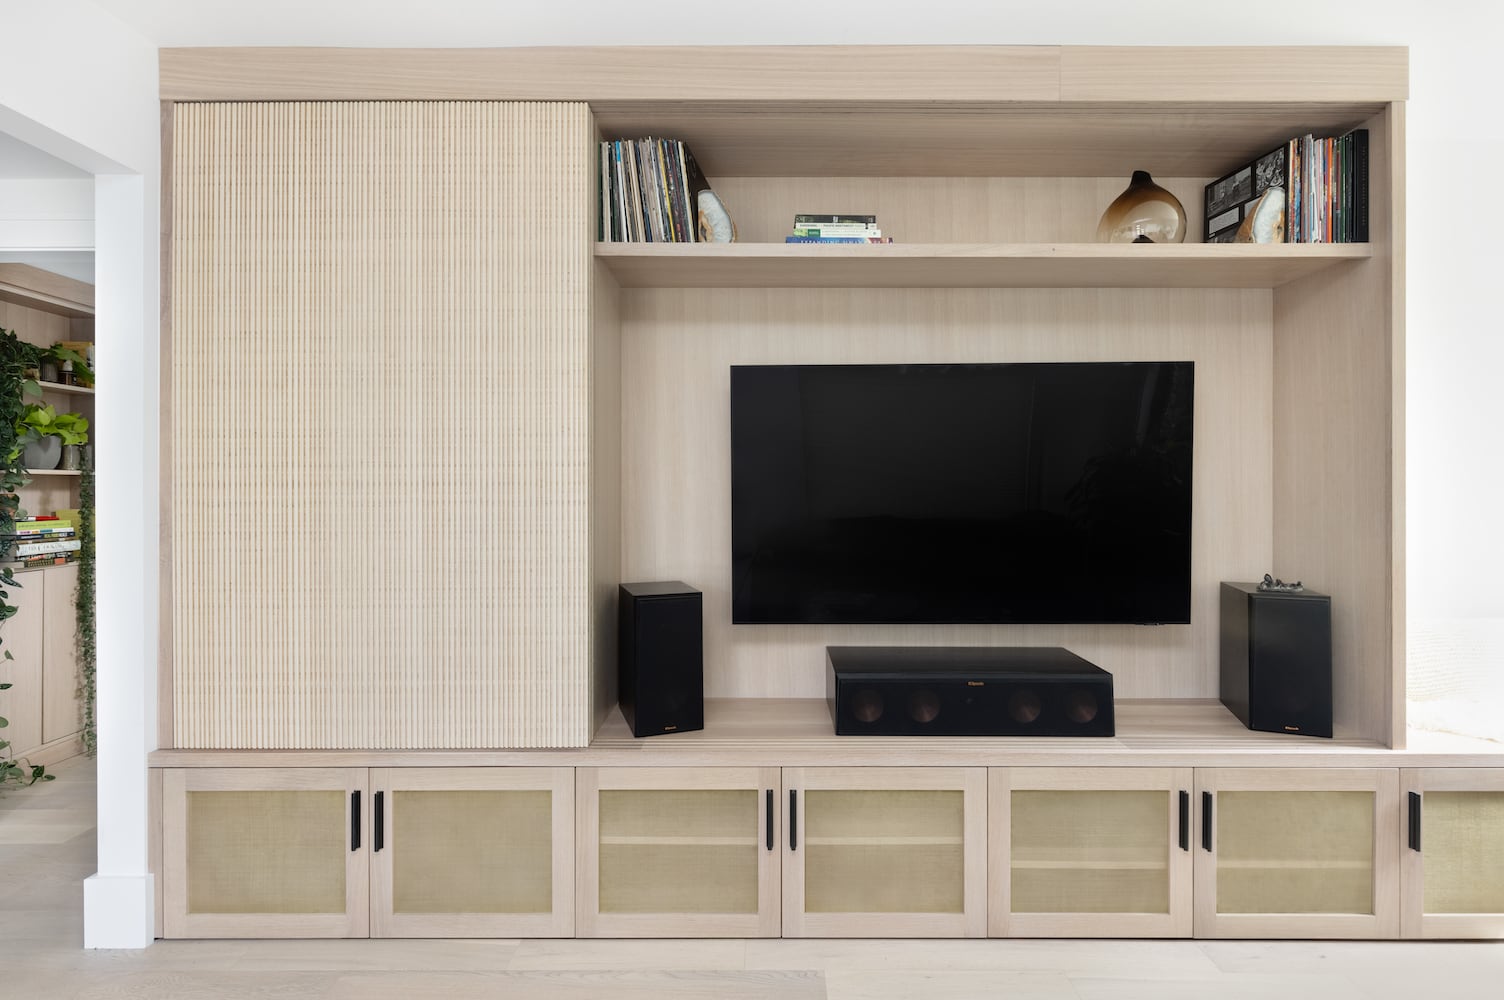 Custom white oak casework revealing entertainment system with gold mesh paneling below